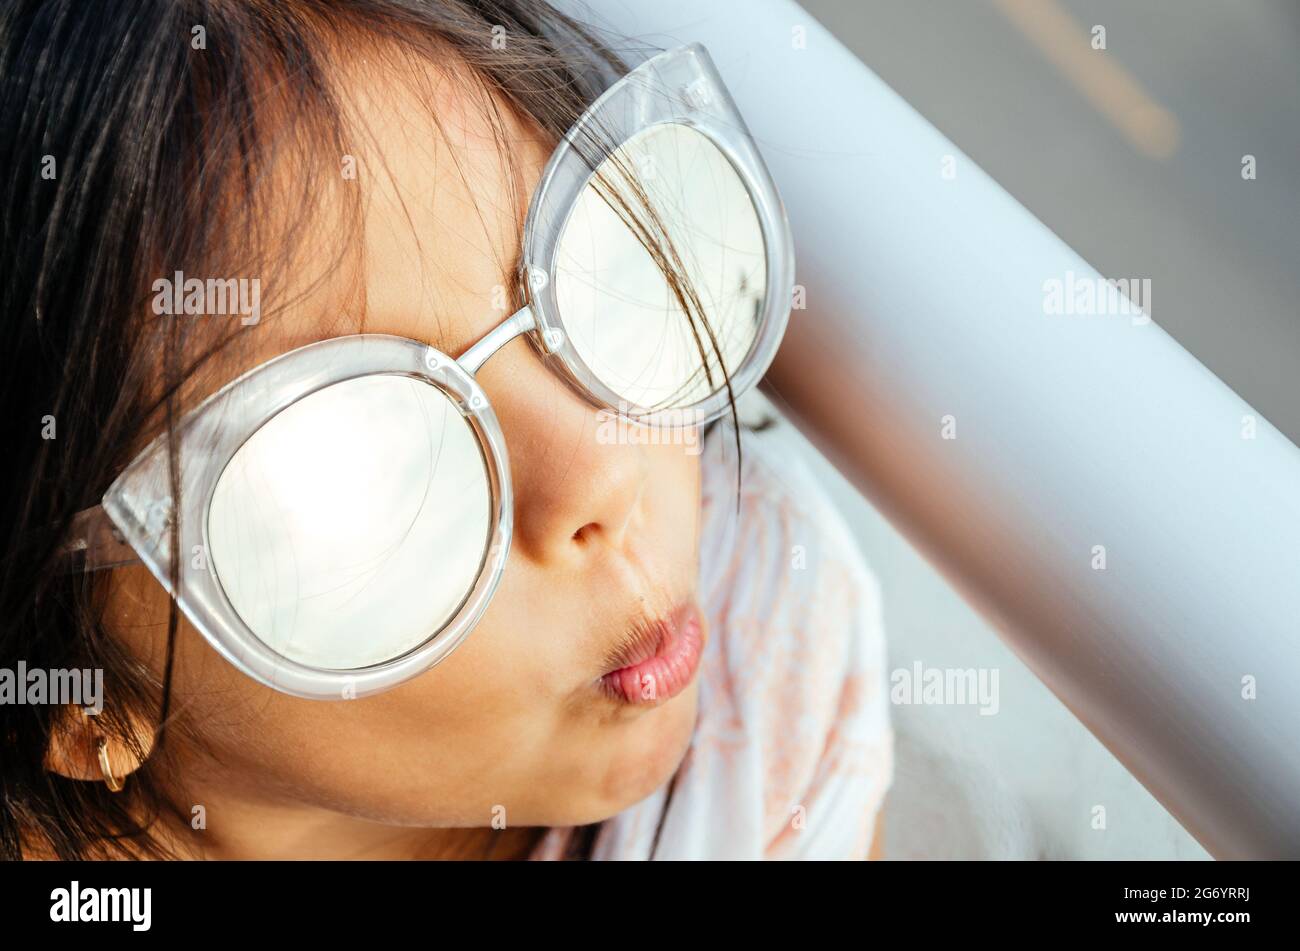 Happy little girl with big sunglasses looking at the sun. Stock Photo